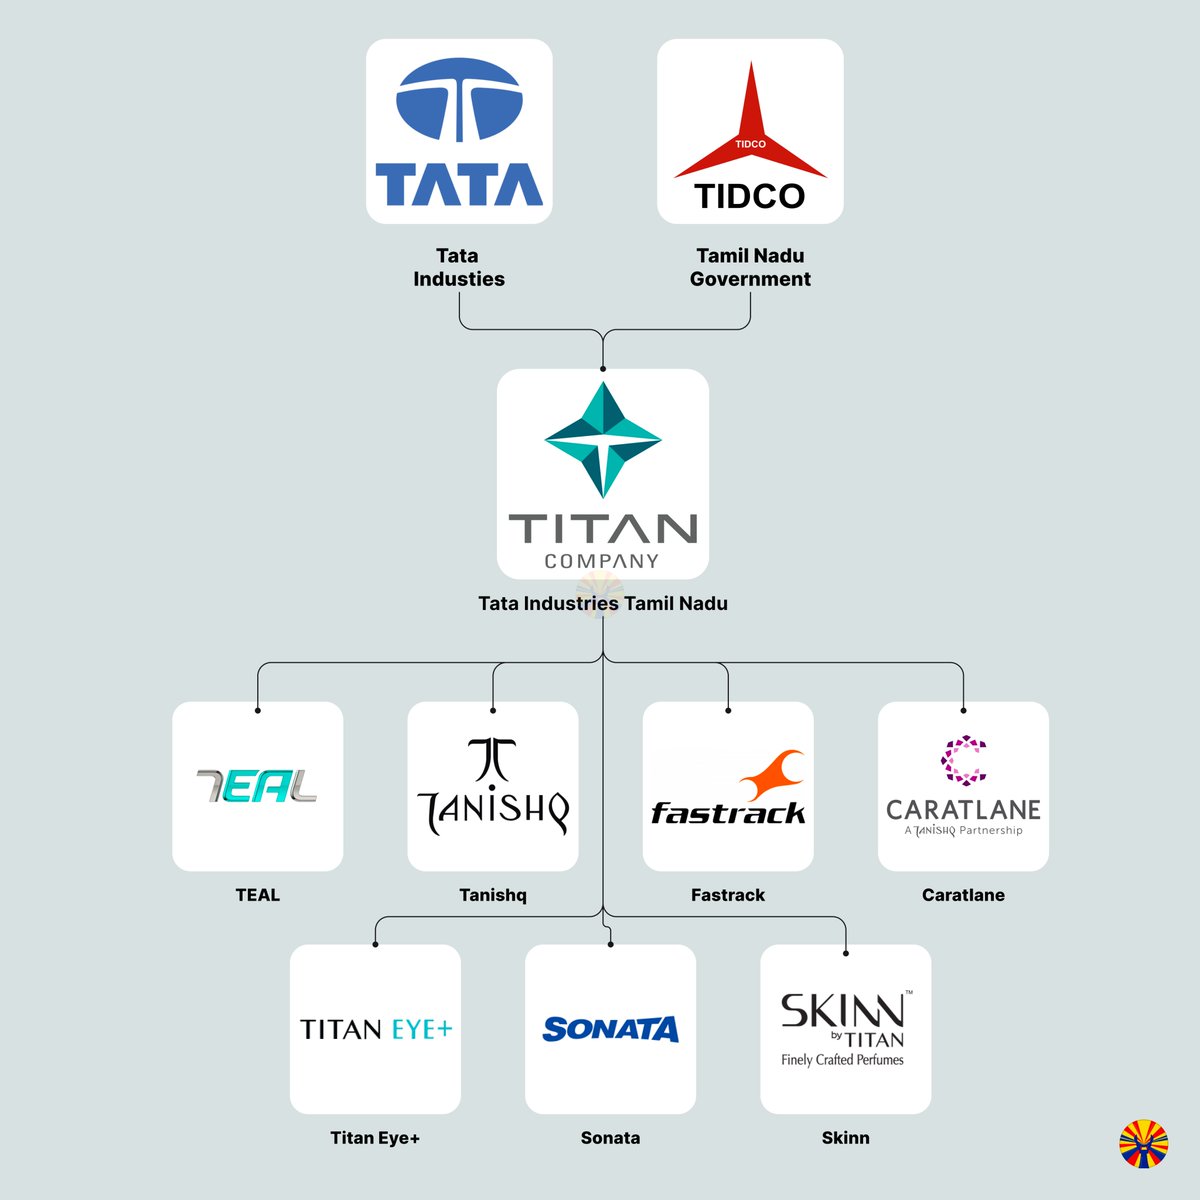 Titan (Tata Industries + TN Govt) Market Cap 2014: $5.34 B 2023: $39.23 B Increase of 634% 🥳 Crazy to believe what private and state collaboration can achieve. It was due to the industrial licensing era in the '80s that made this happen in Hosur. Xerxes Desai ♥️ 🛐